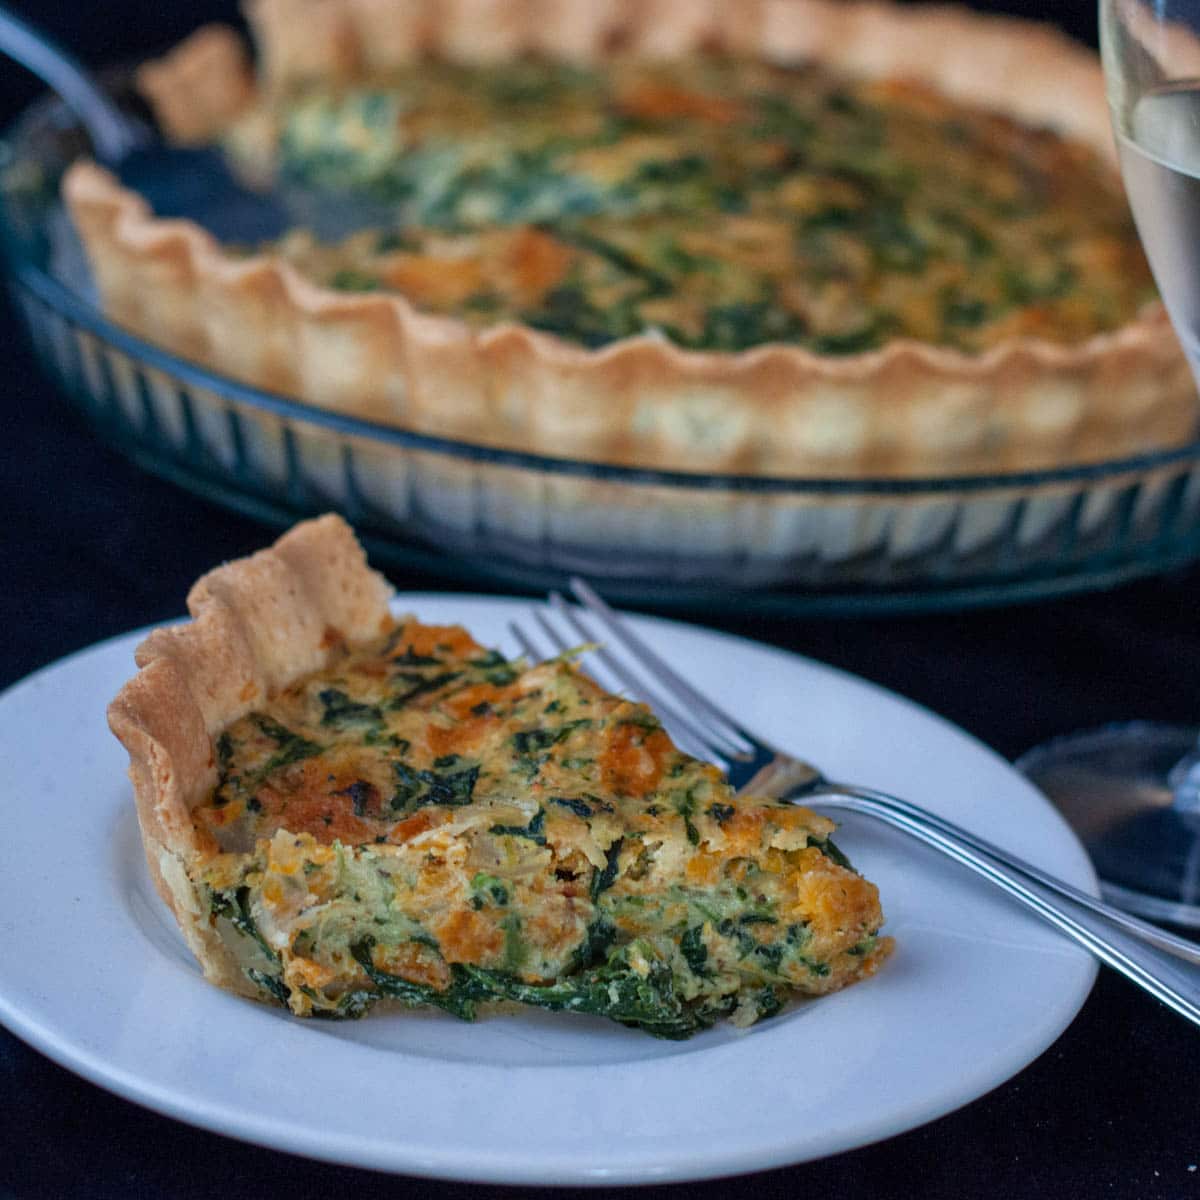 Italian Spinach Ricotta Pie With Caramelized Squash slice served on a plate